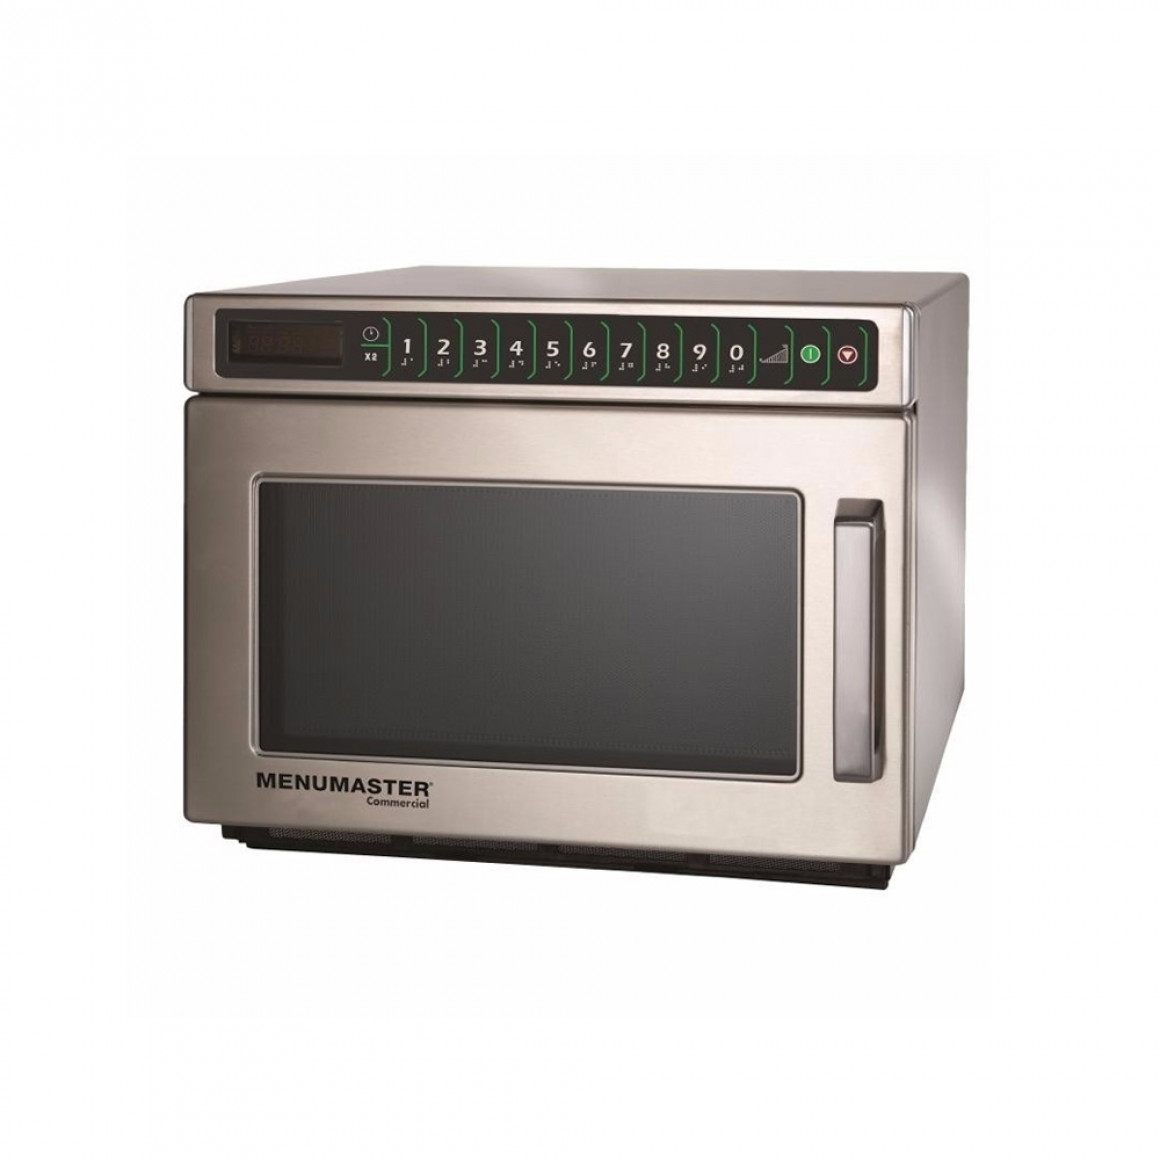 Microwave oven Heavy Duty Compact - CM736